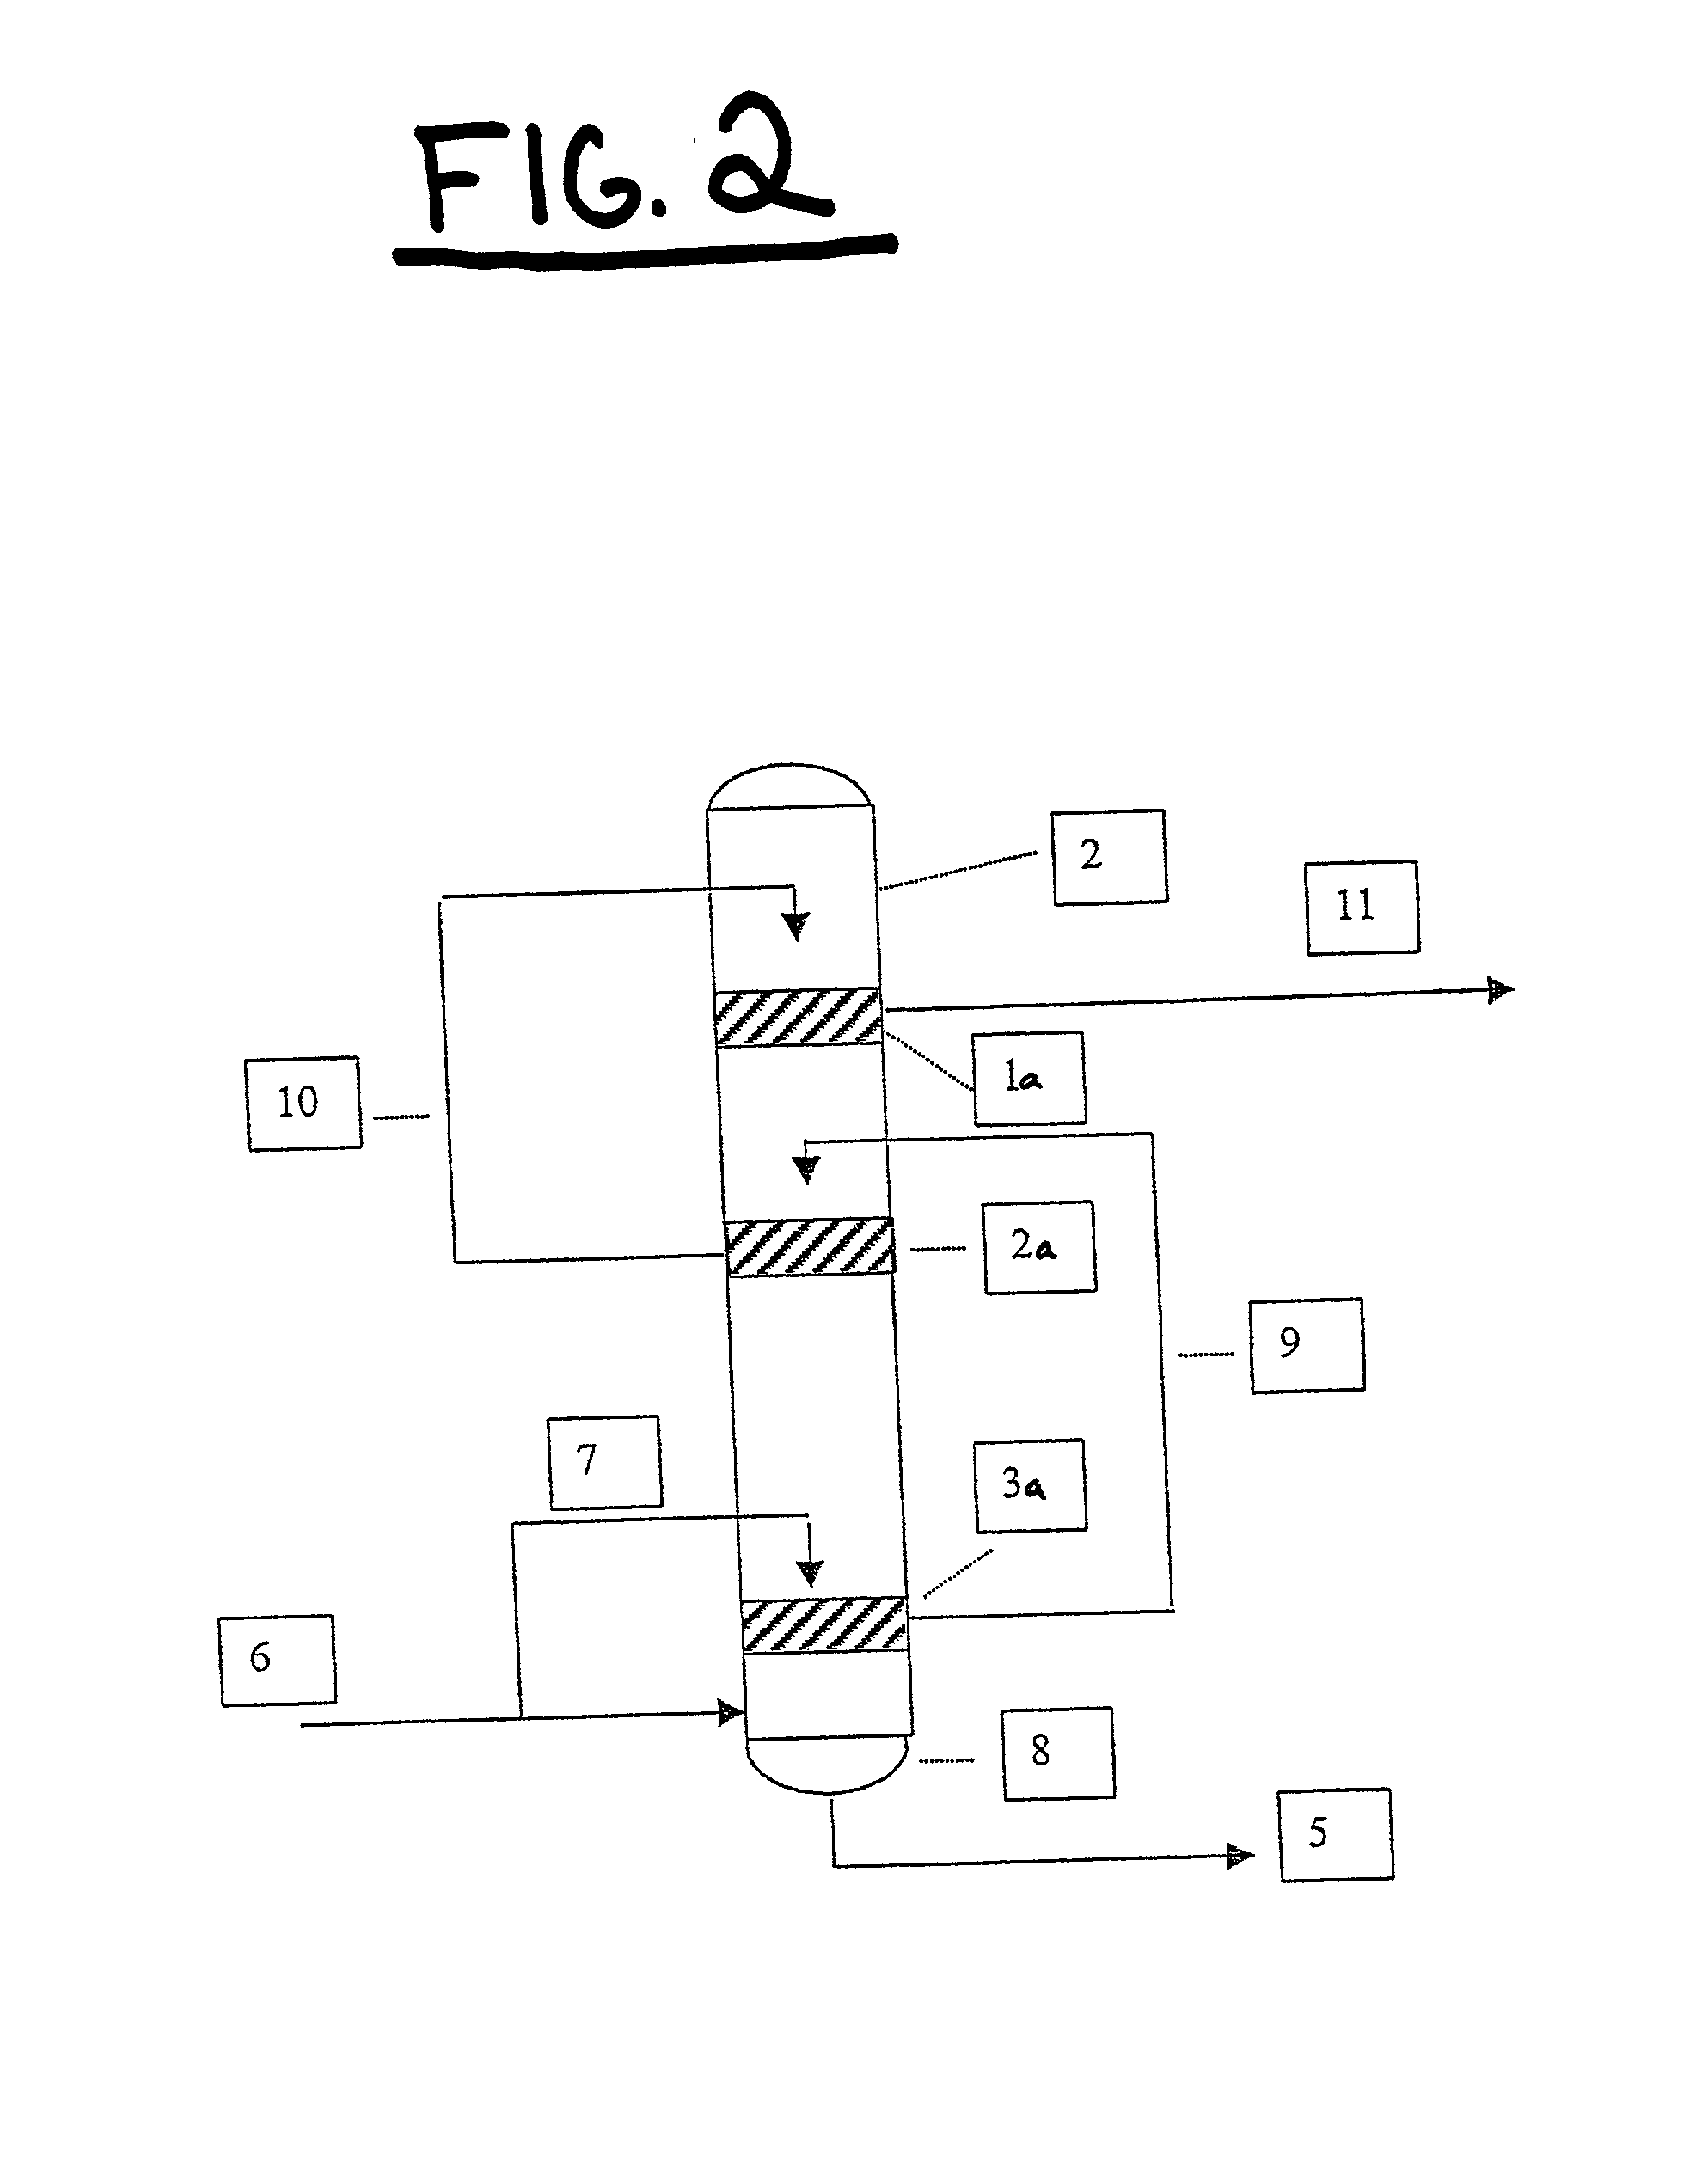 Process and configuration for providing external upflow/internal downflow in a continuous digester